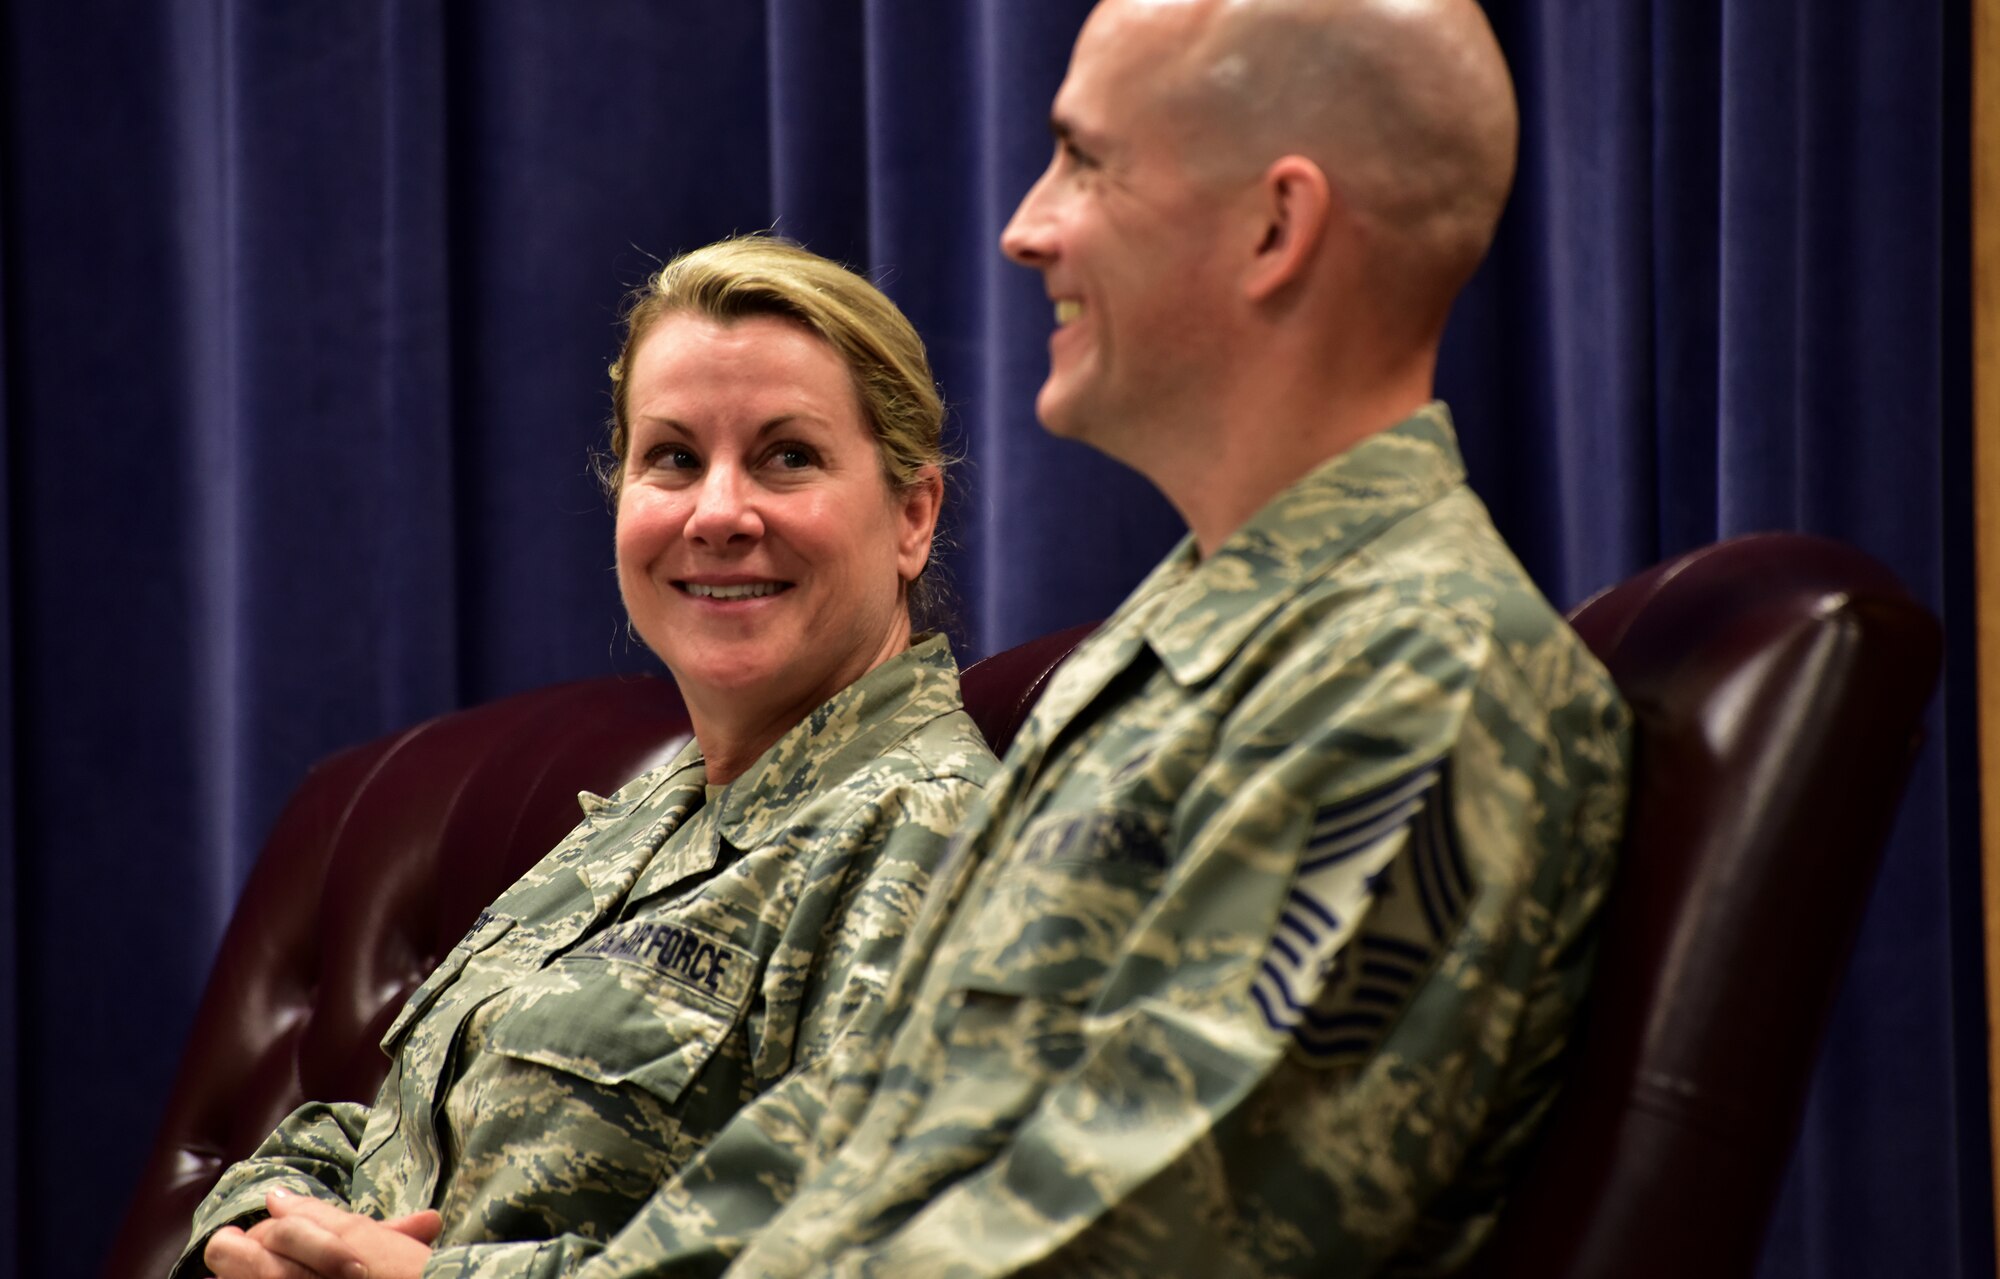 Outgoing 166th Airlift Wing Command Chief Master Sgt. Shaune Peters, left, looks on as her successor, Command Chief Master Sgt. William Horay, is introduced during their change of authority ceremony held at the New Castle ANG Base, Del. on July 14, 2018. (U.S. Air National Guard photo by Staff Sgt. Nathan Bright)